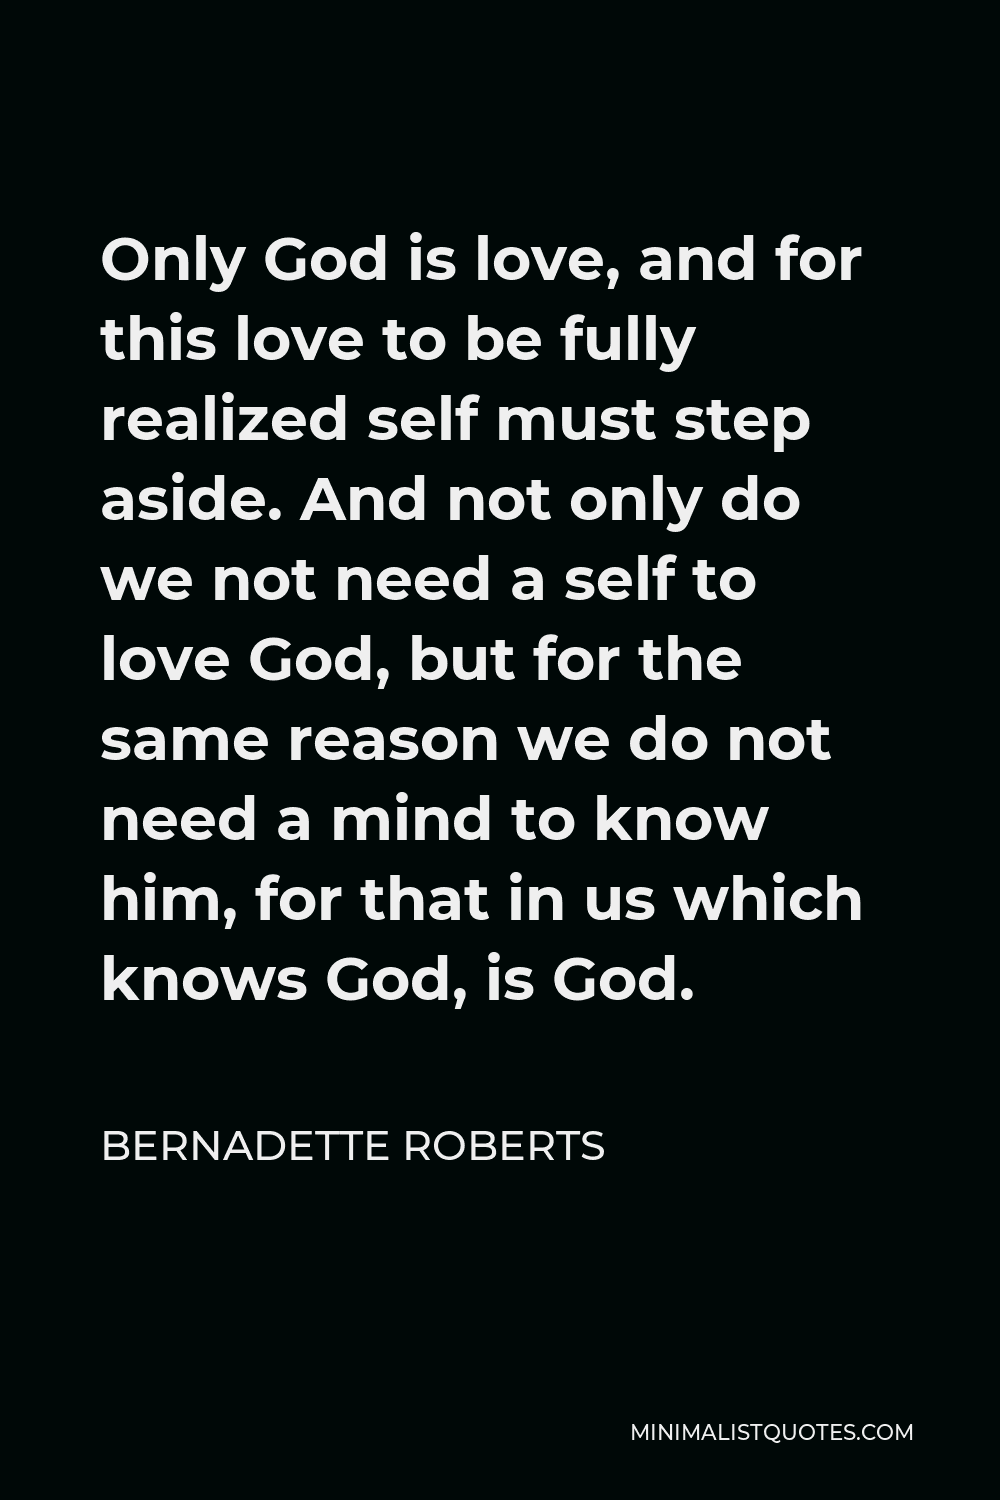 Bernadette Roberts Quote - Only God is love, and for this love to be fully realized self must step aside. And not only do we not need a self to love God, but for the same reason we do not need a mind to know him, for that in us which knows God, is God.